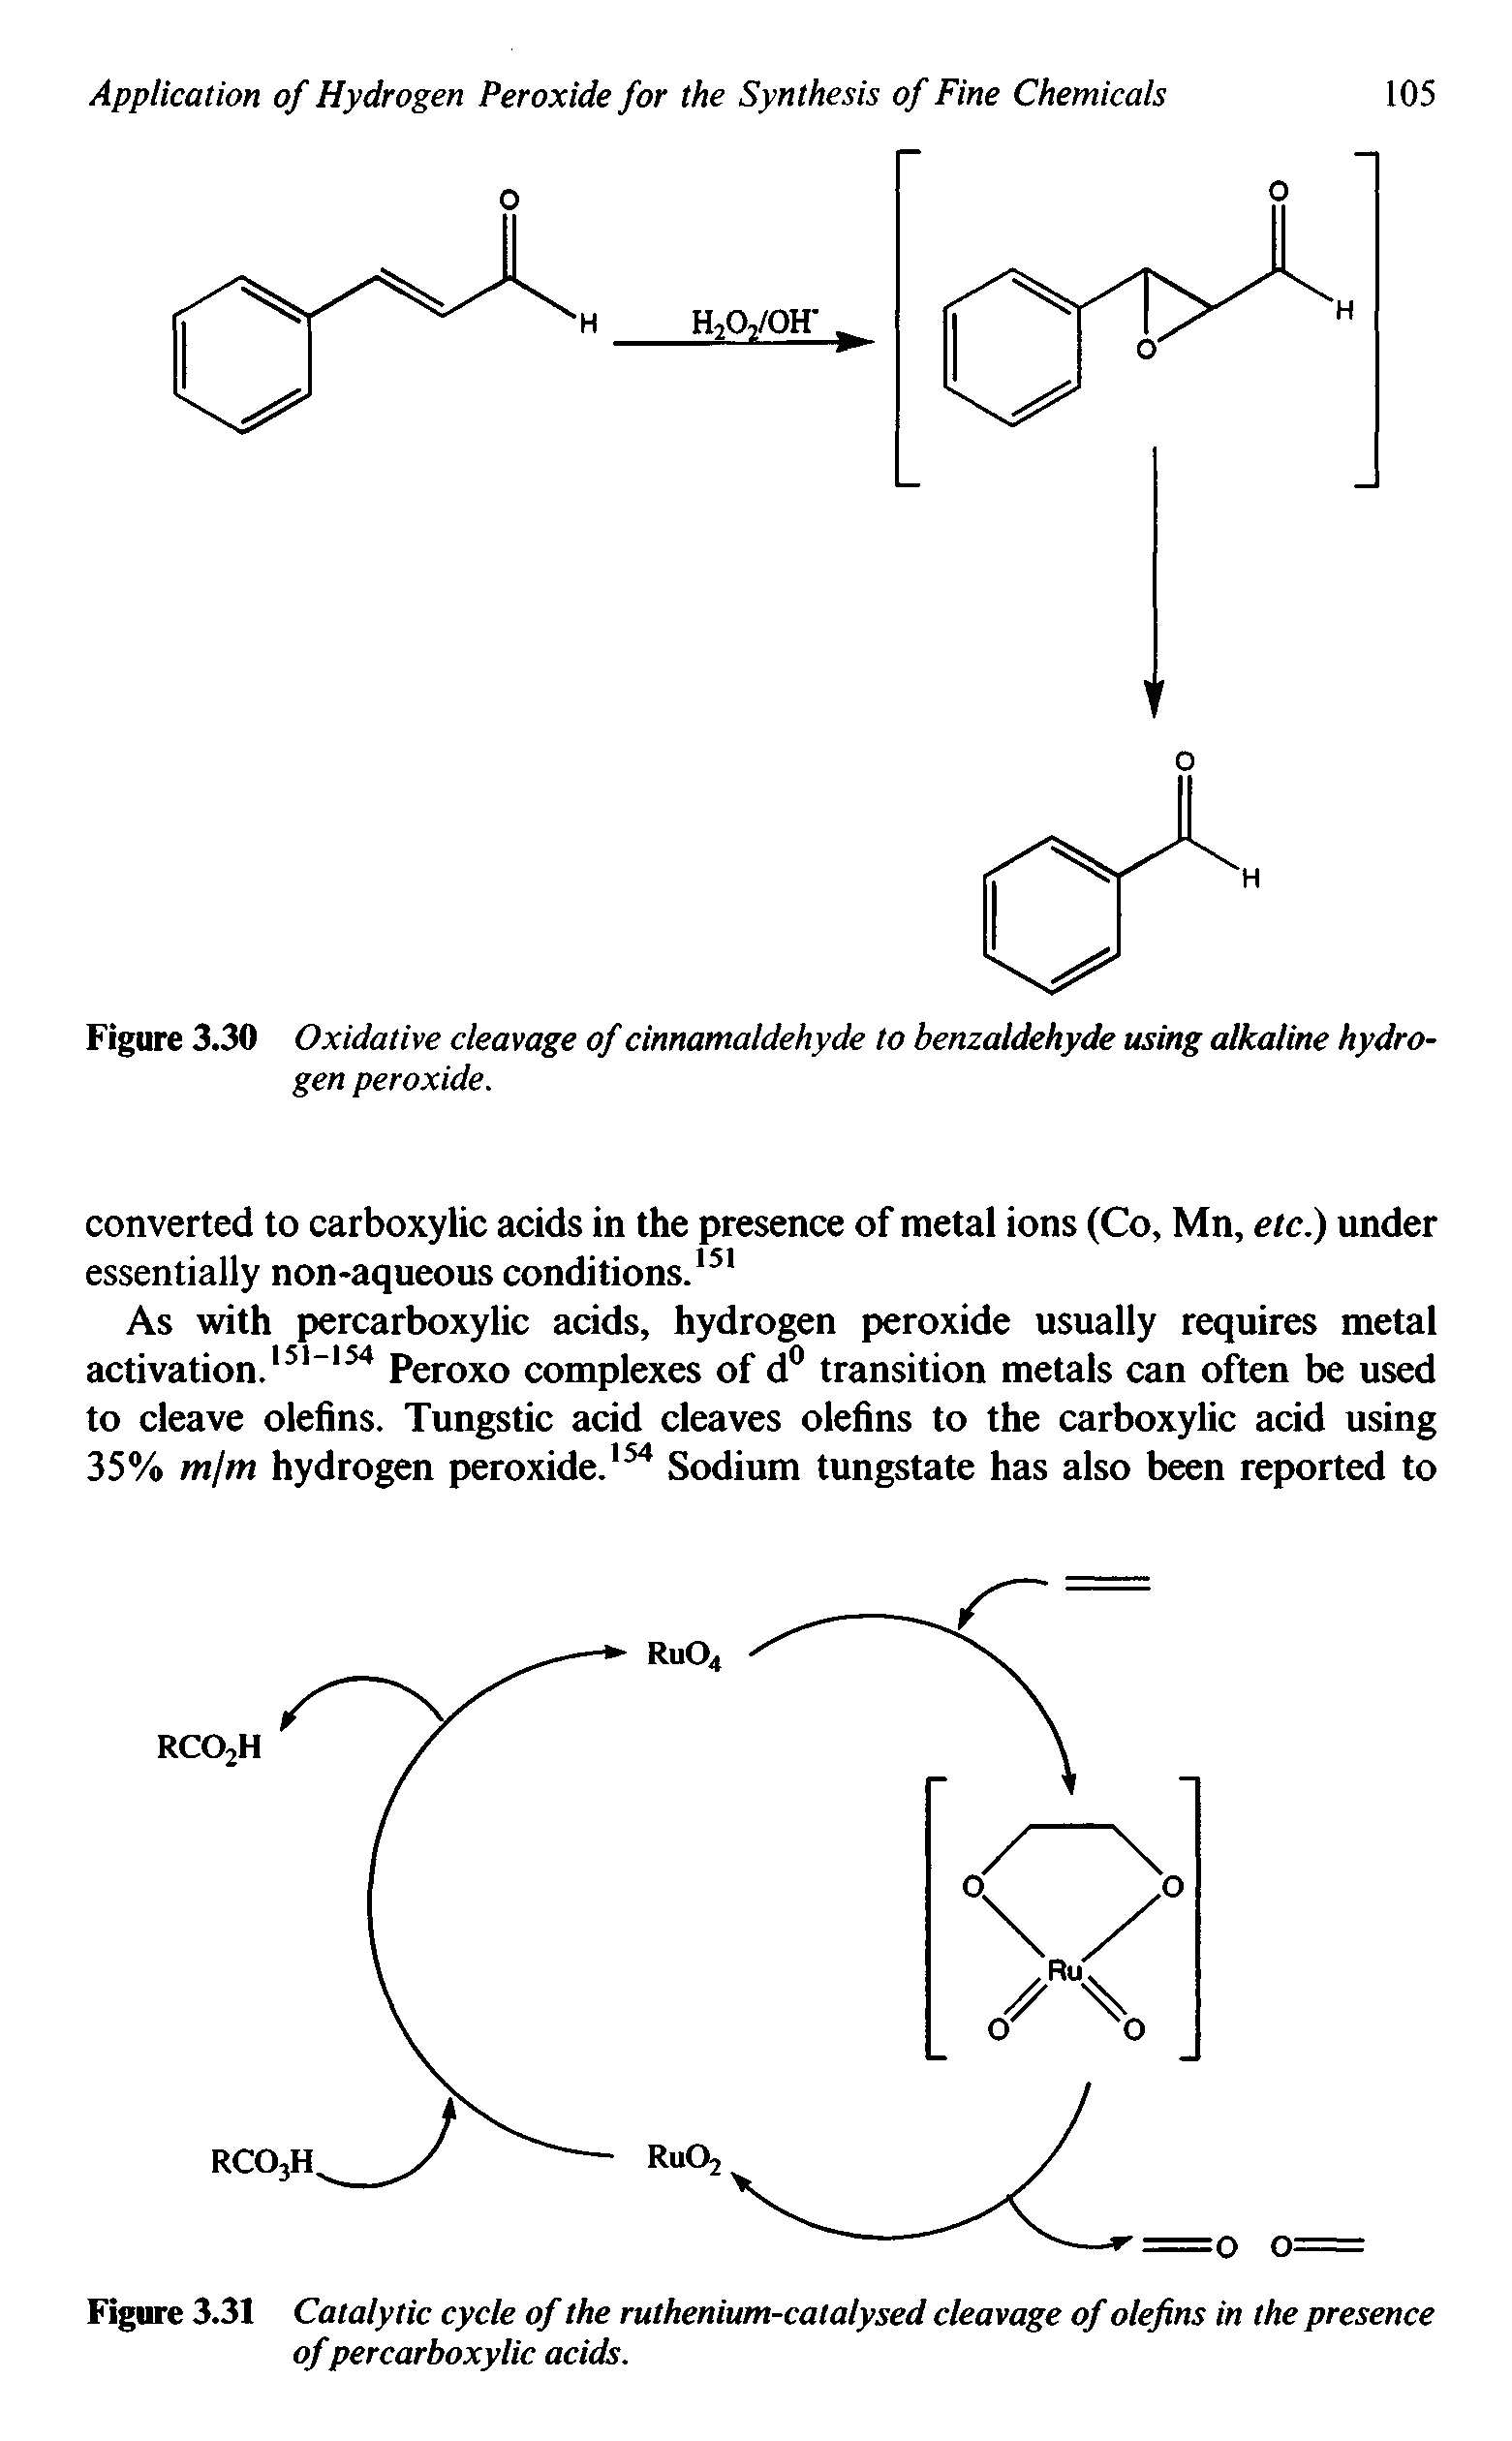 Figure 3.31 Catalytic cycle of the ruthenium-catalysed cleavage of olefins in the presence of percarboxylic acids.